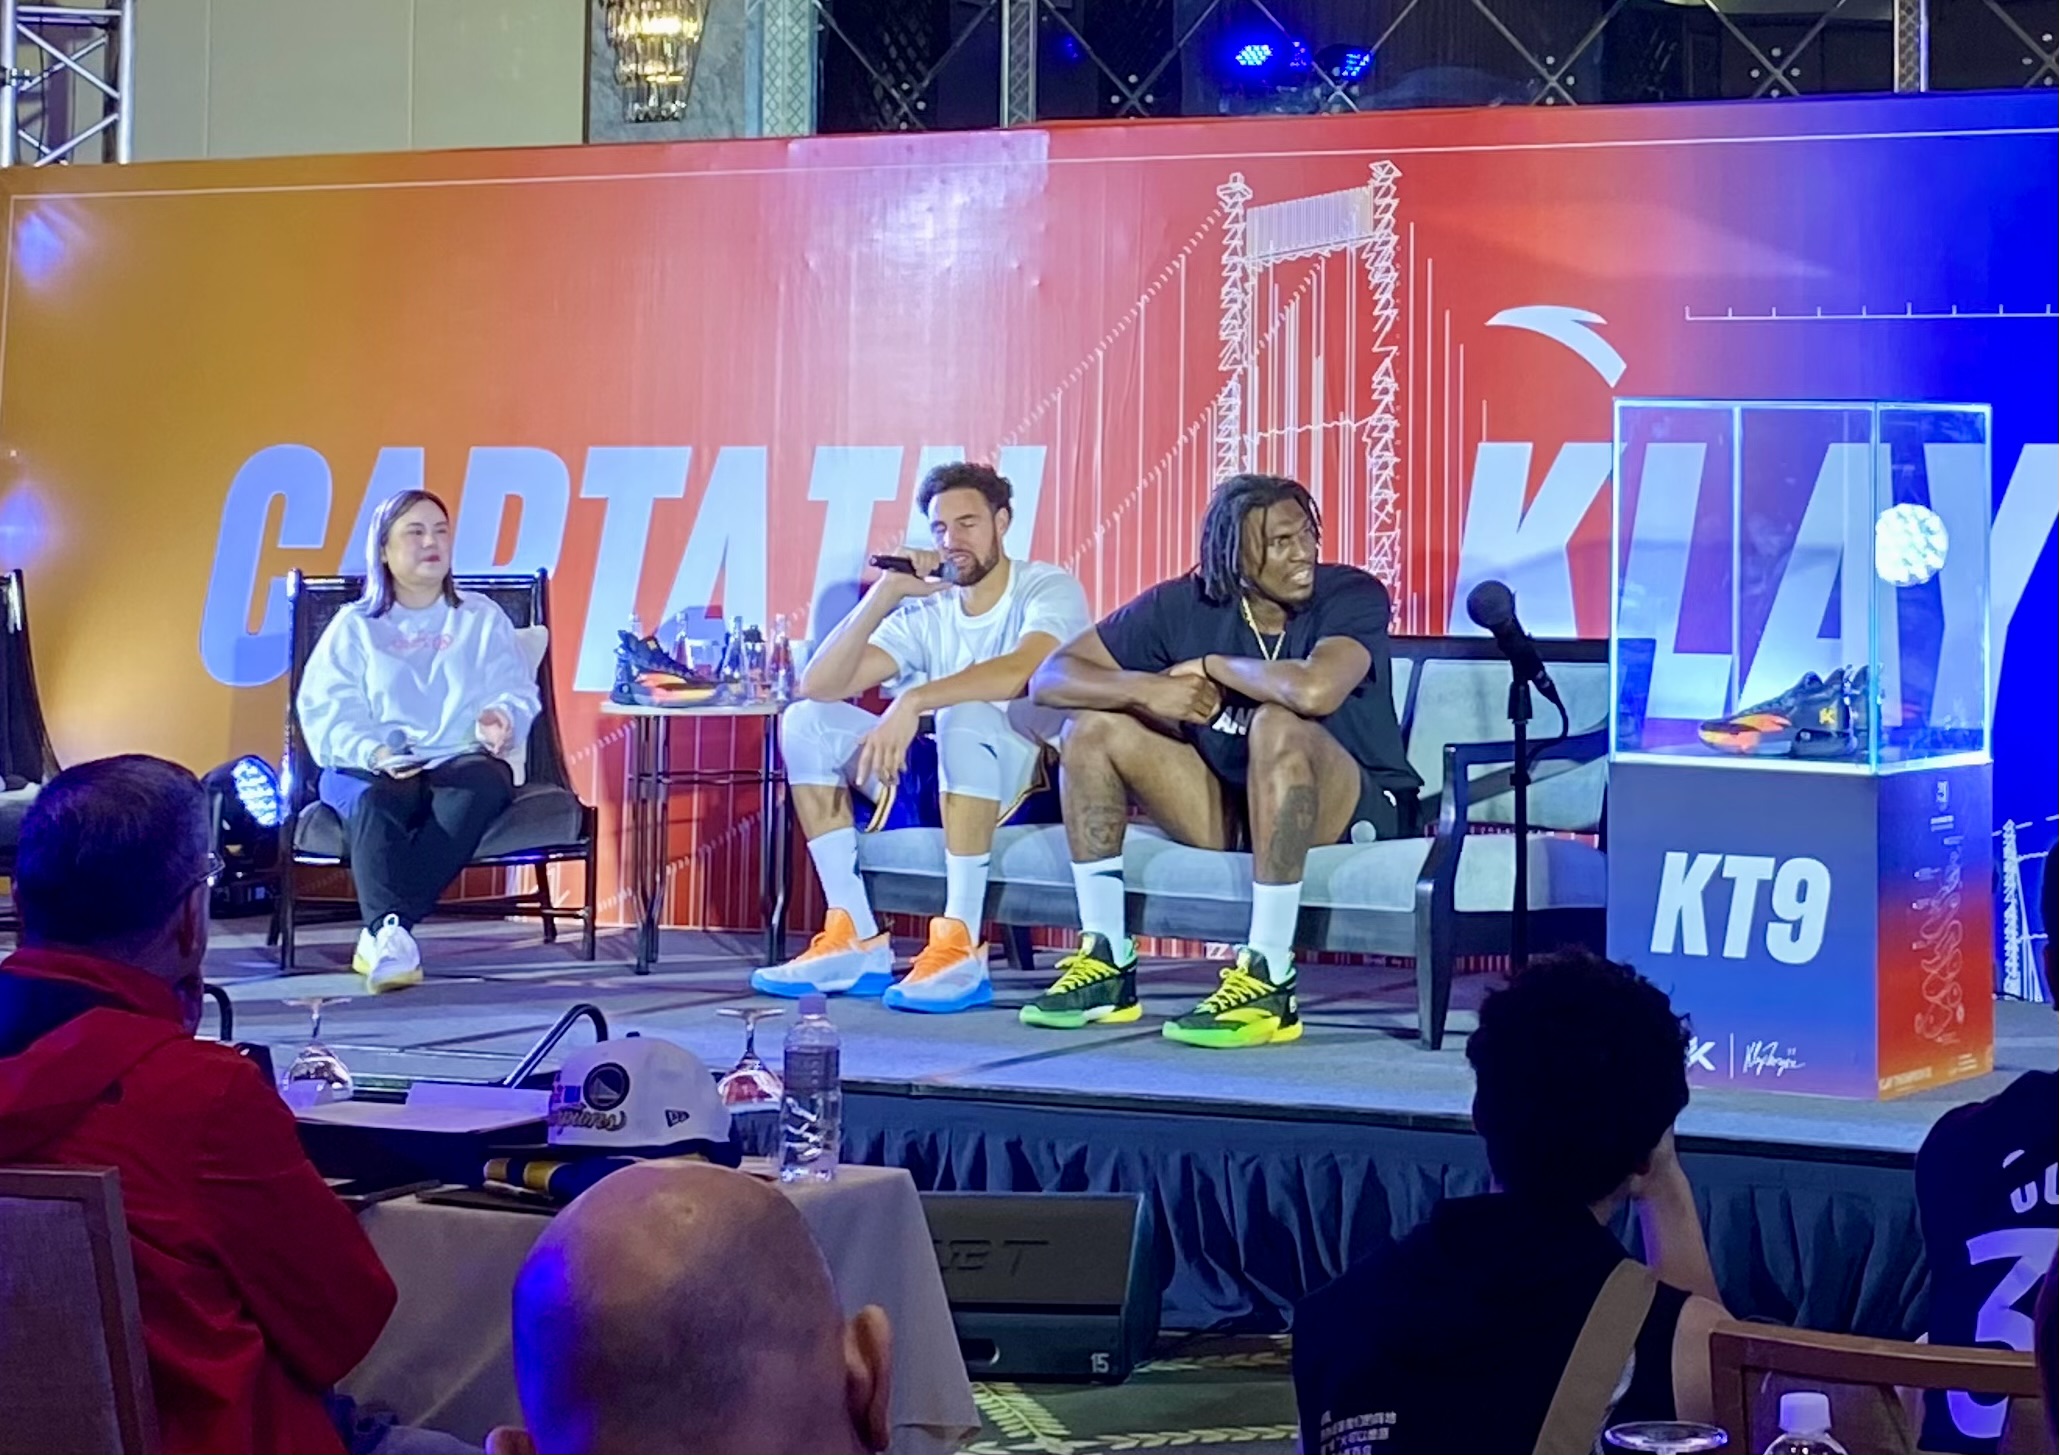 Golden State Warriors Klay Thompson and Kevon Looney are in Manila NBA